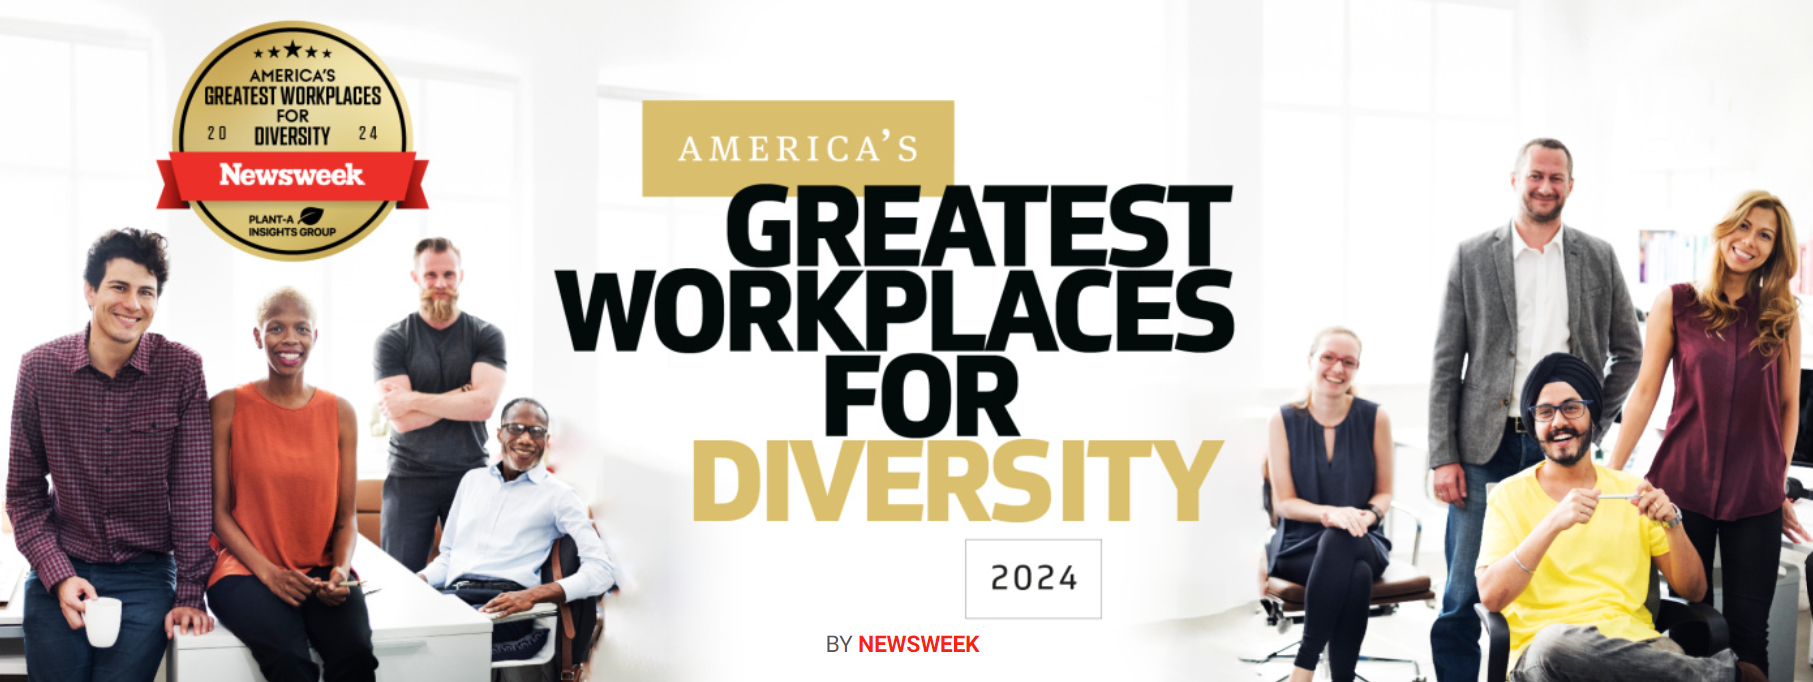 America's Greatest Workplaces for Diversity 2024